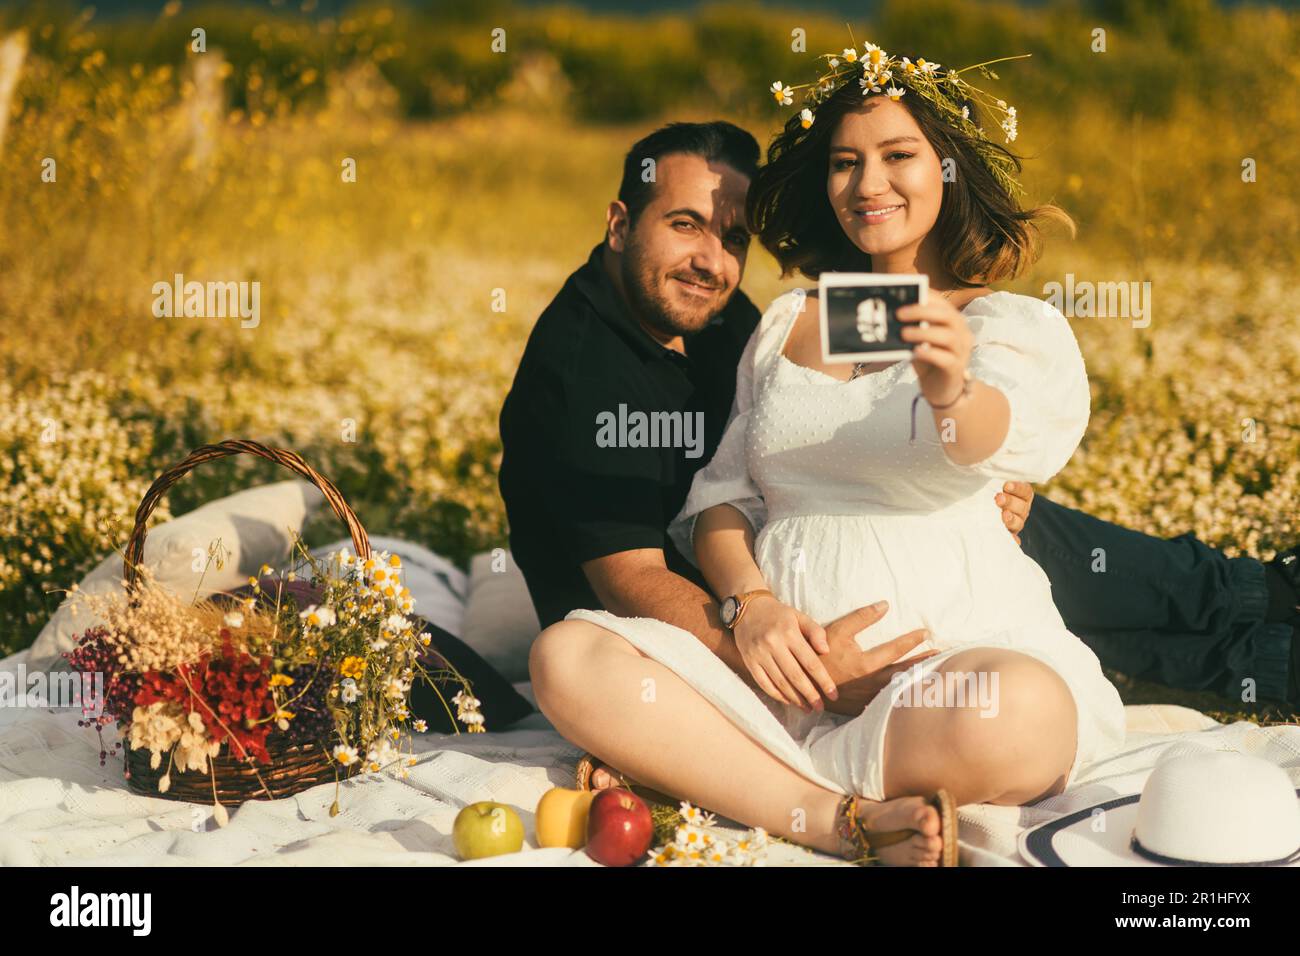 Sitting on a white picnic blanket, a pregnant woman with a daisy crown and her husband are sharing a joyful moment, he touches her belly while she pro Stock Photo